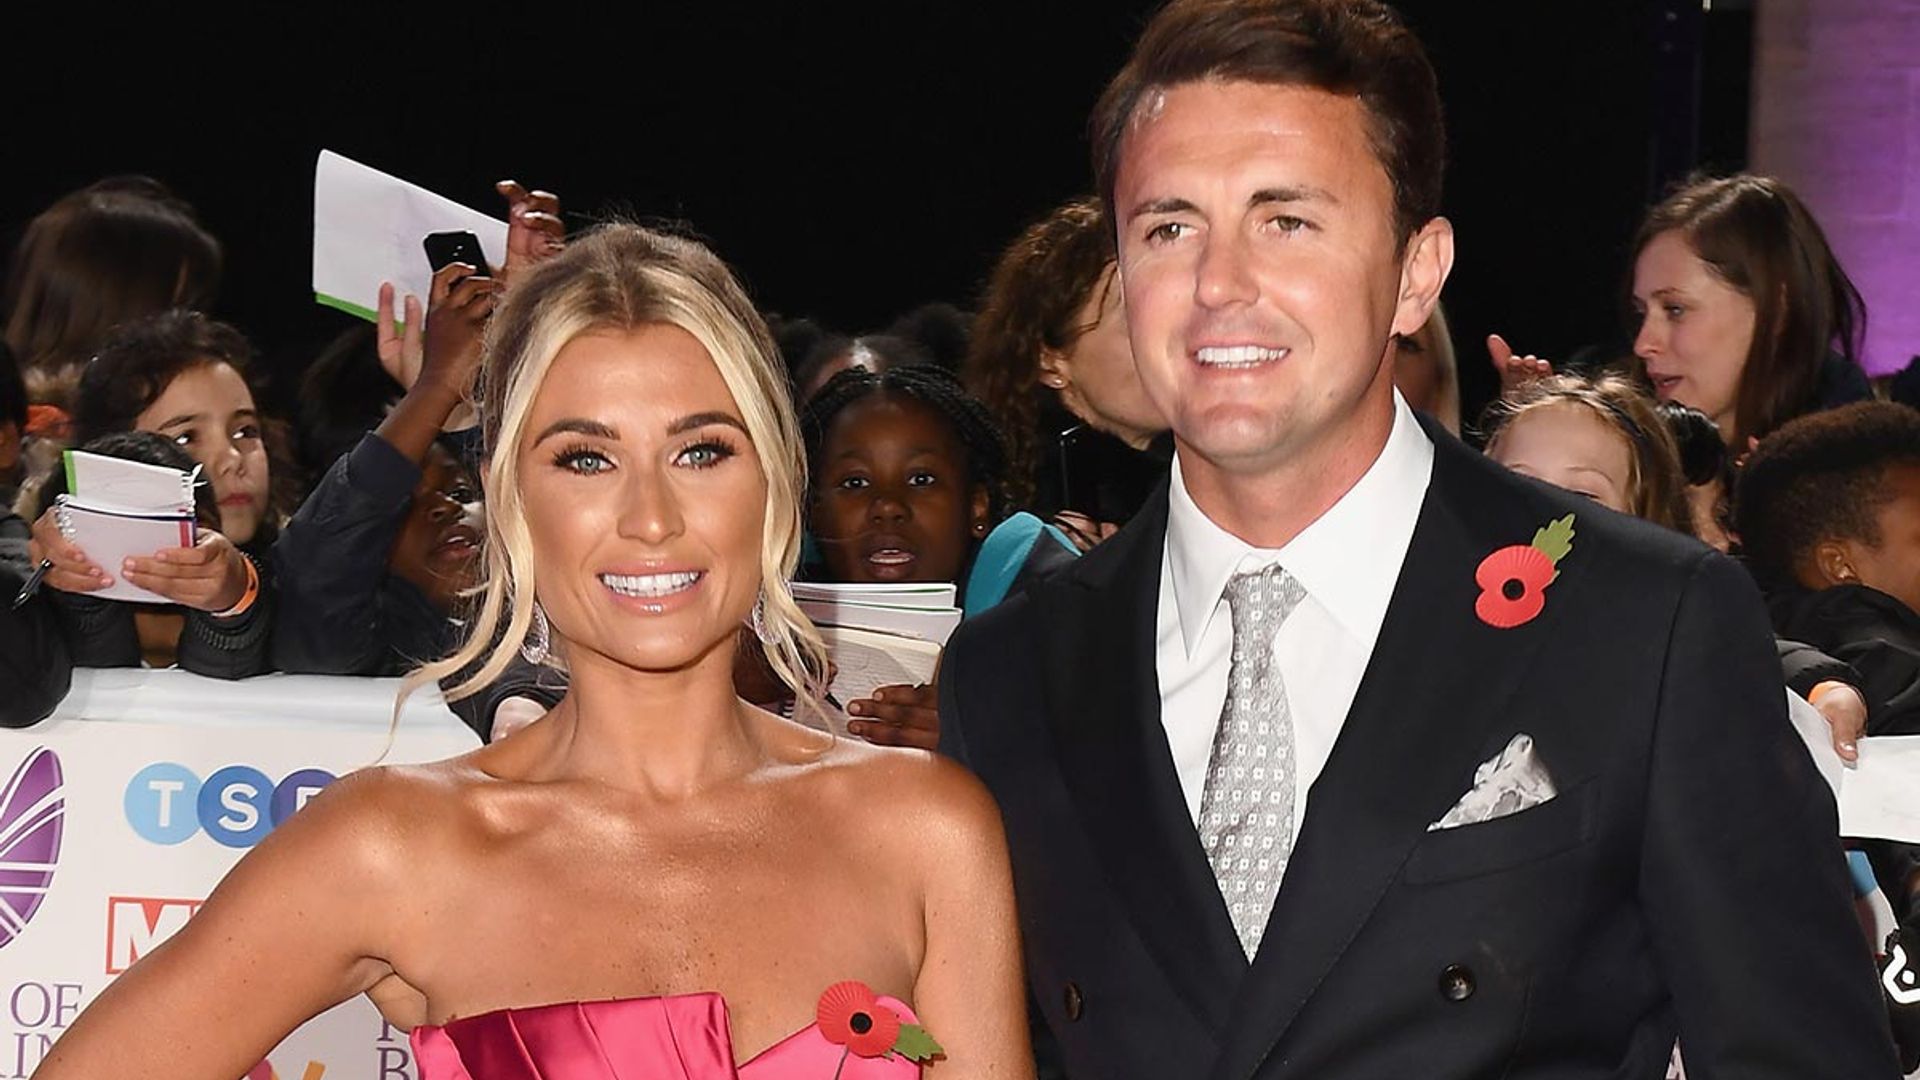 Billie Faiers and fiancé Greg Shepherd just had a first dance lesson from this popstar